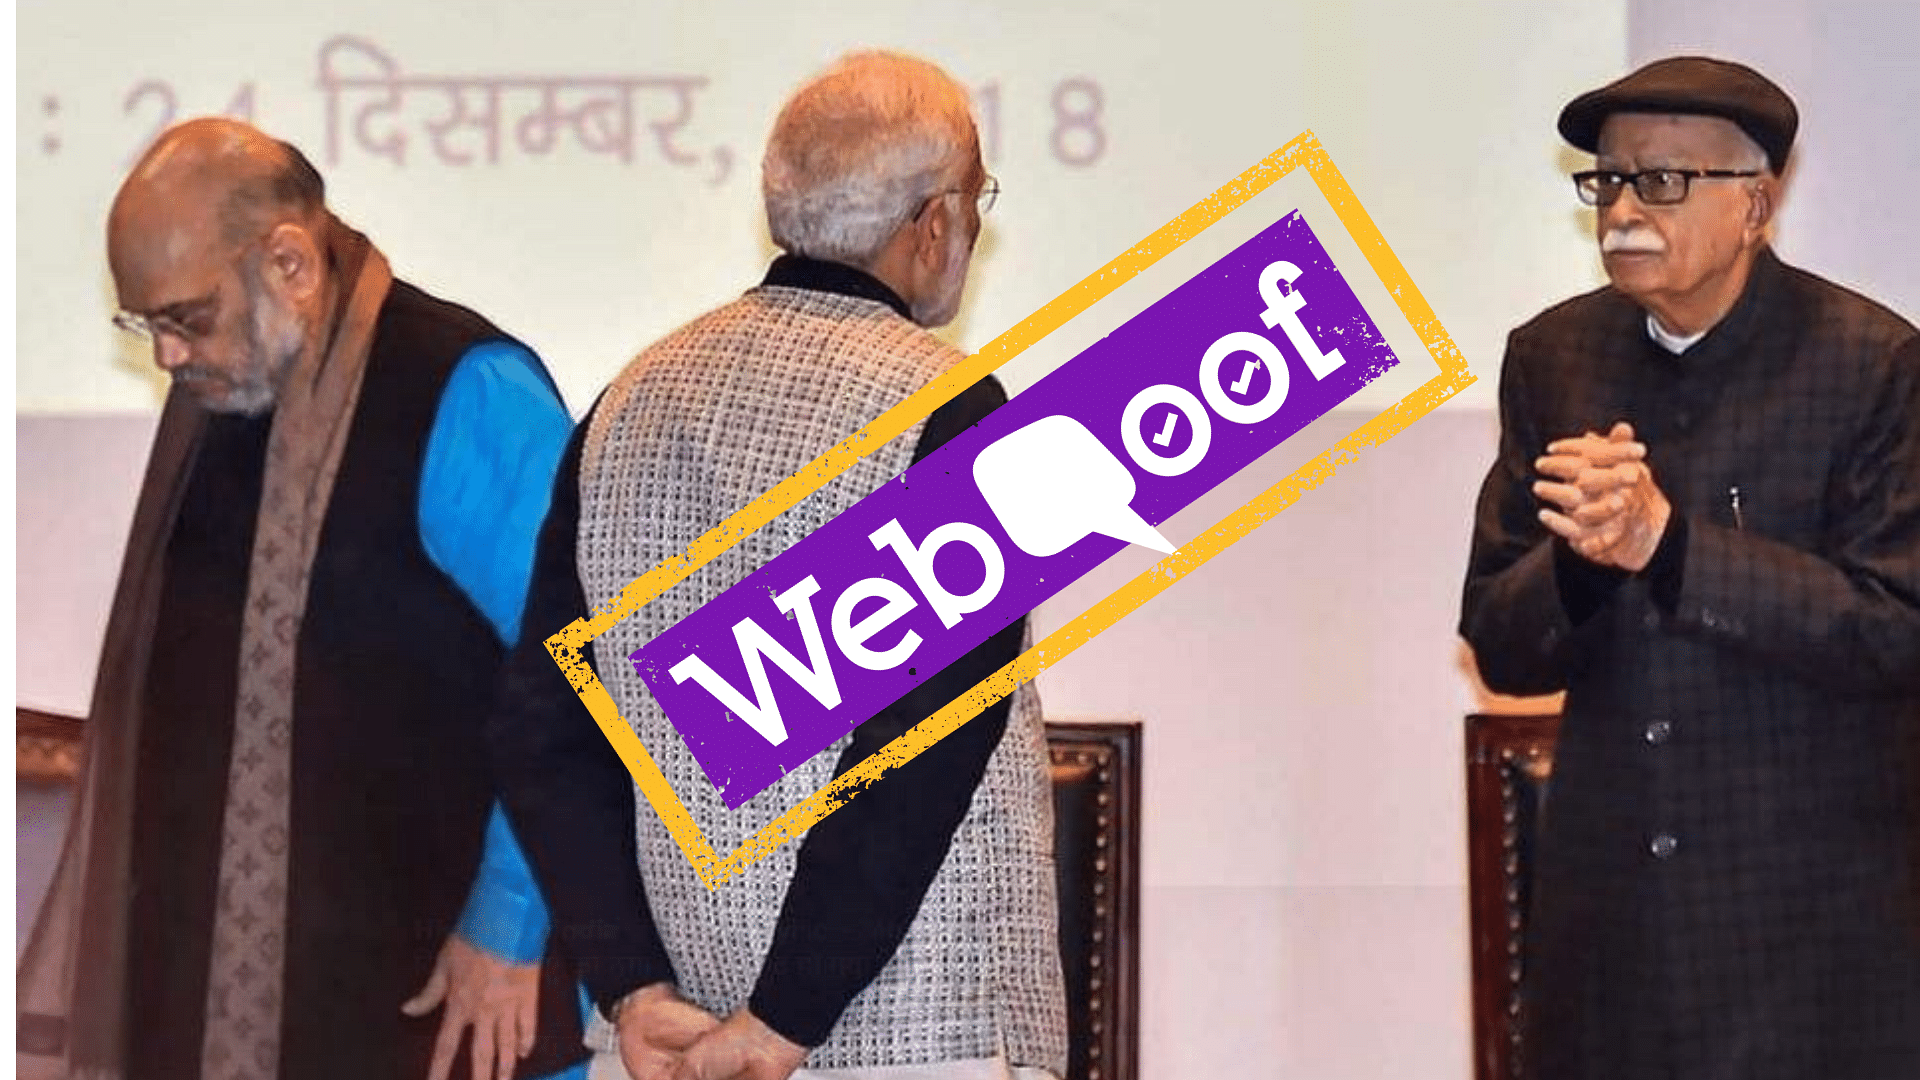 A purported image suggesting PM Modi disrespected Advani at a function went viral on social media